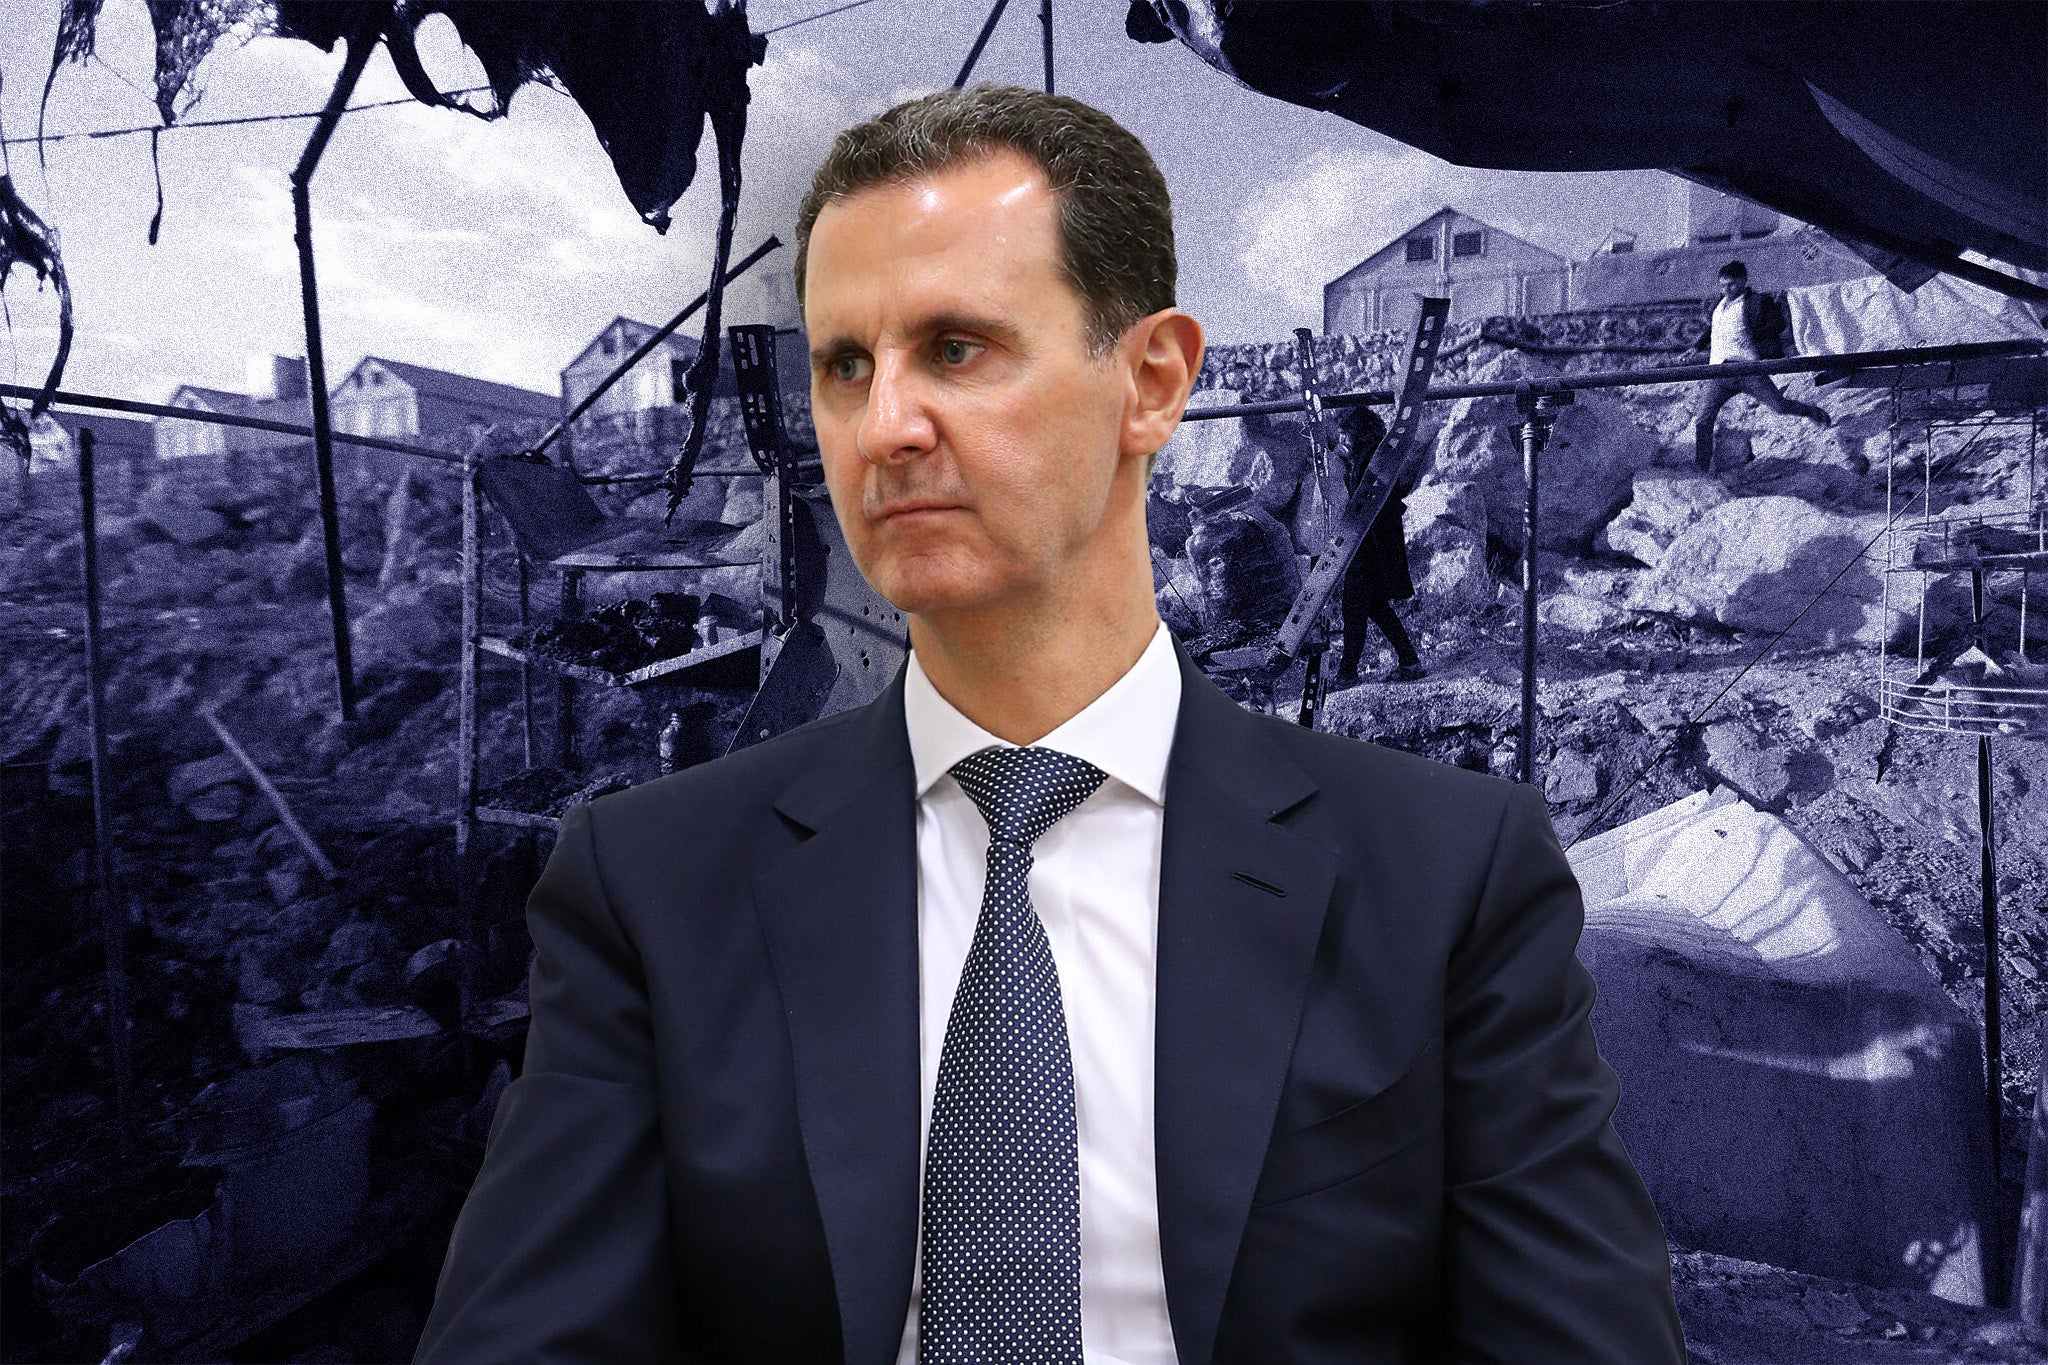 Syrian President Bashar al-Assad (pictured) has been invited to the Cop28 climate summit. Background: Damage caused by reported regime shelling on the camp of Maram for internally displaced people near the village of Kafr Jales in Syria's northwestern Idlib province, on November 6, 2022